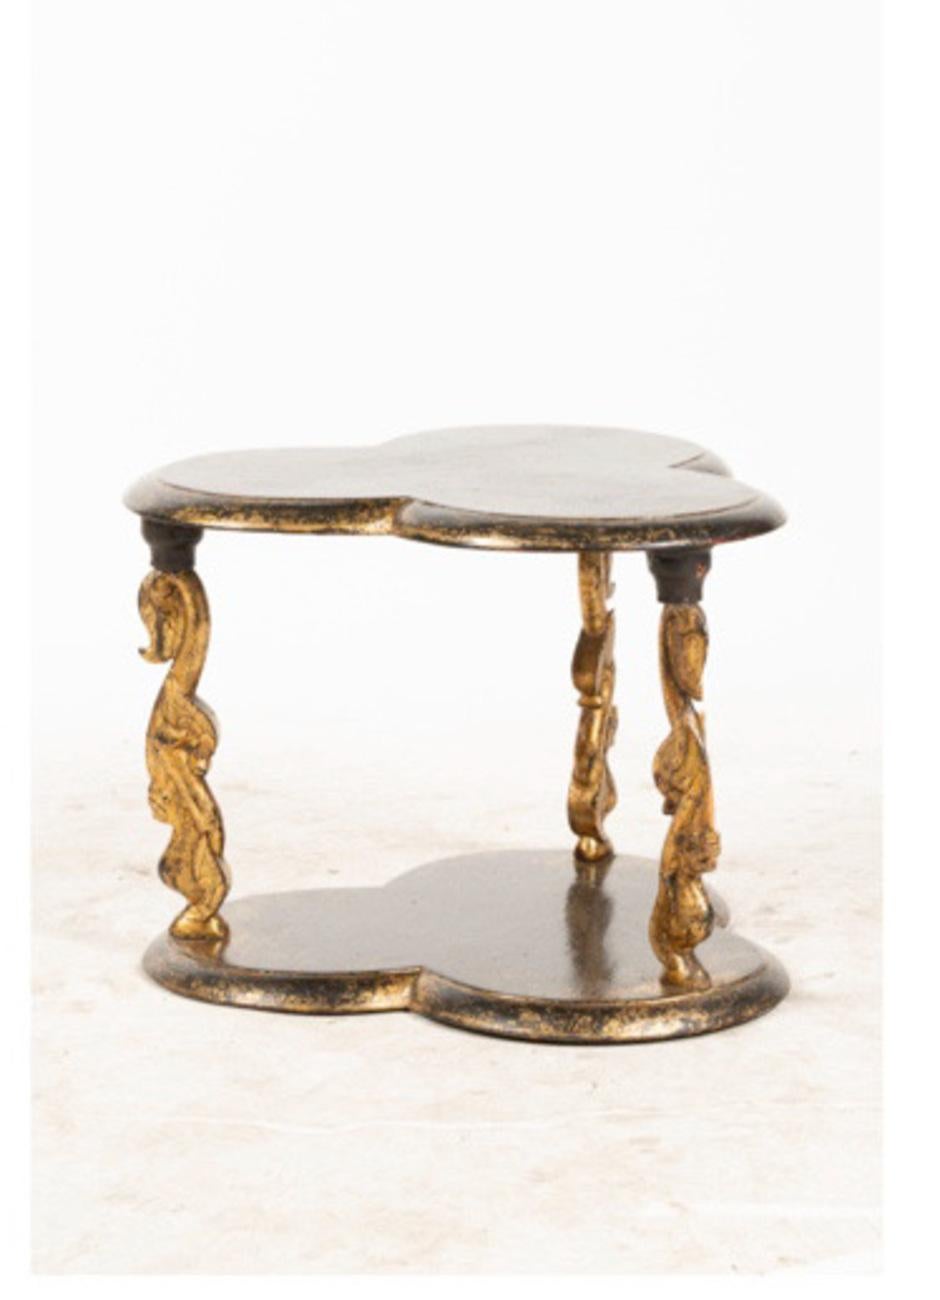 This is an uncommon form of small table that is in the style of Rose Tarlow or Mario Buatta. The table is ebonized with applied gold chinosierie decoration. The faux patina has been applied by a true artist. The table is in overall very good